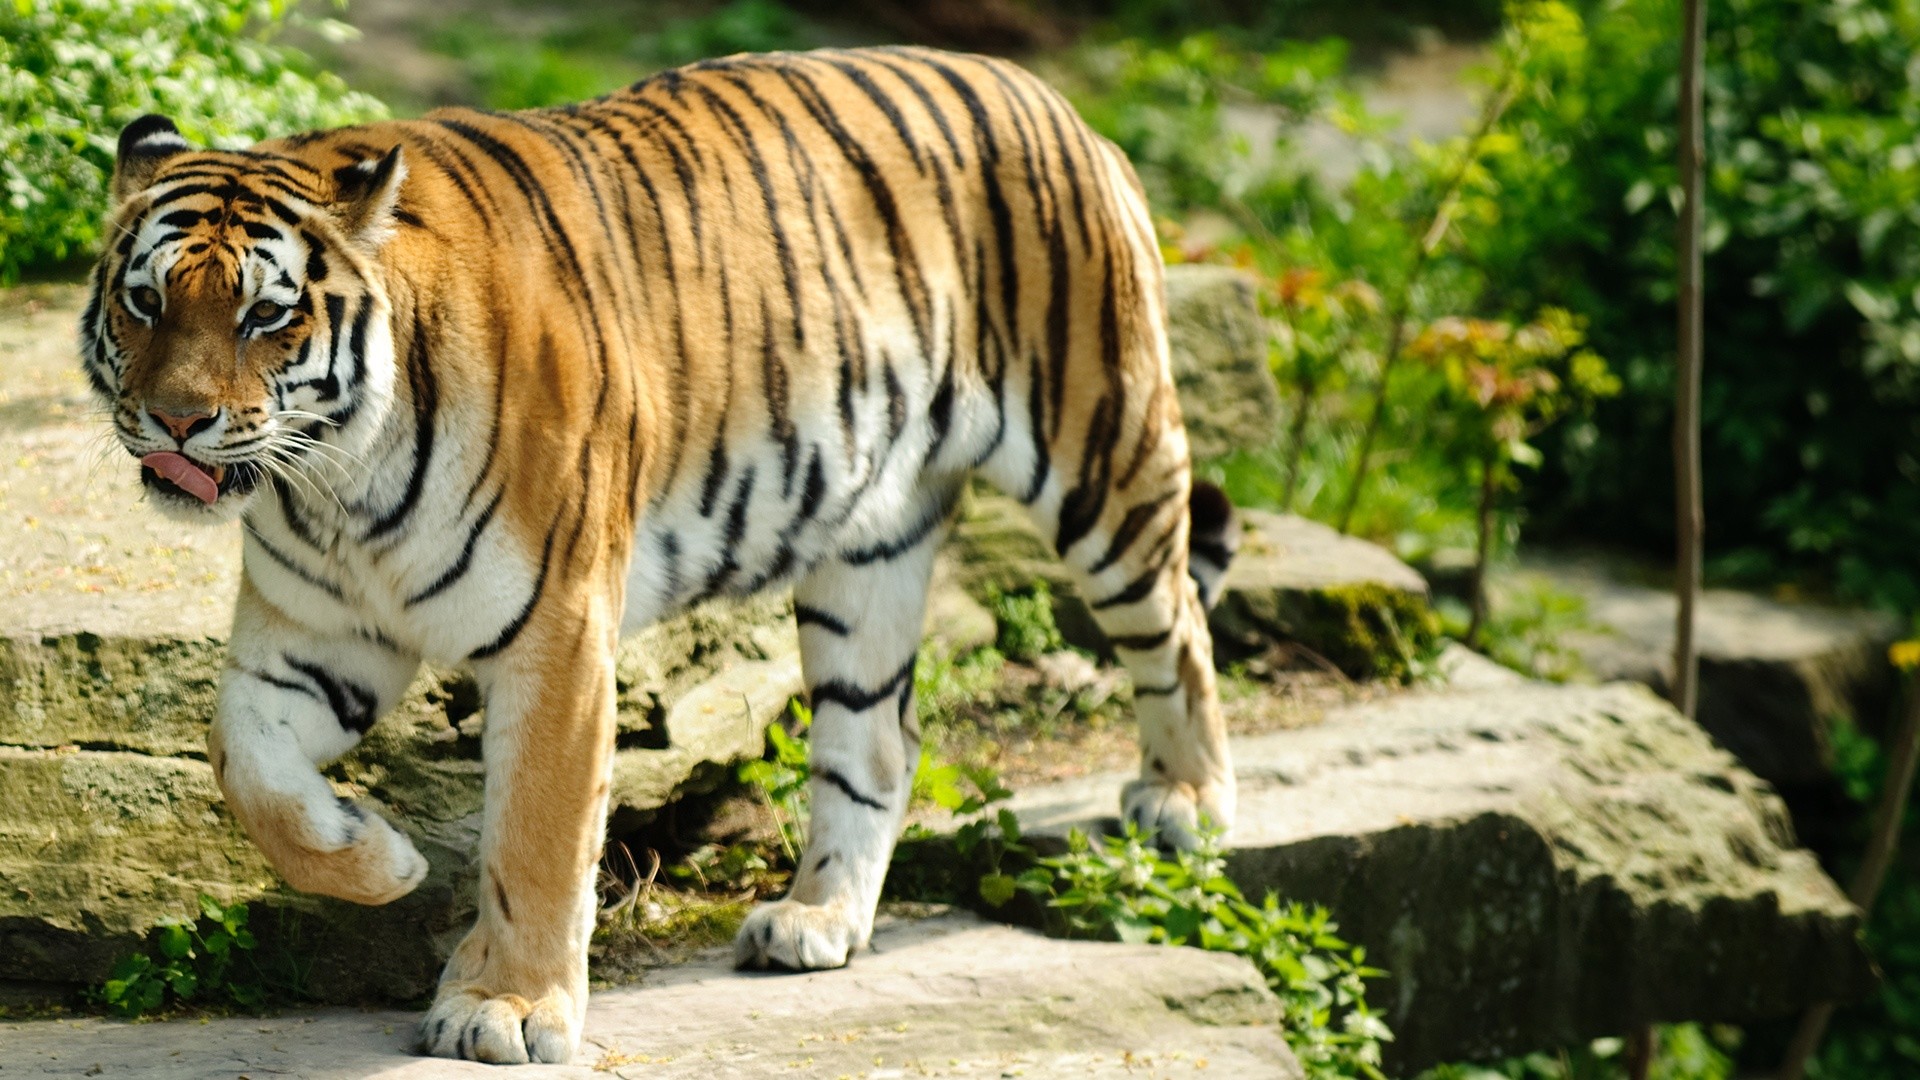 Nothing found for 39811 Bali Tiger Sightings Wallpaper